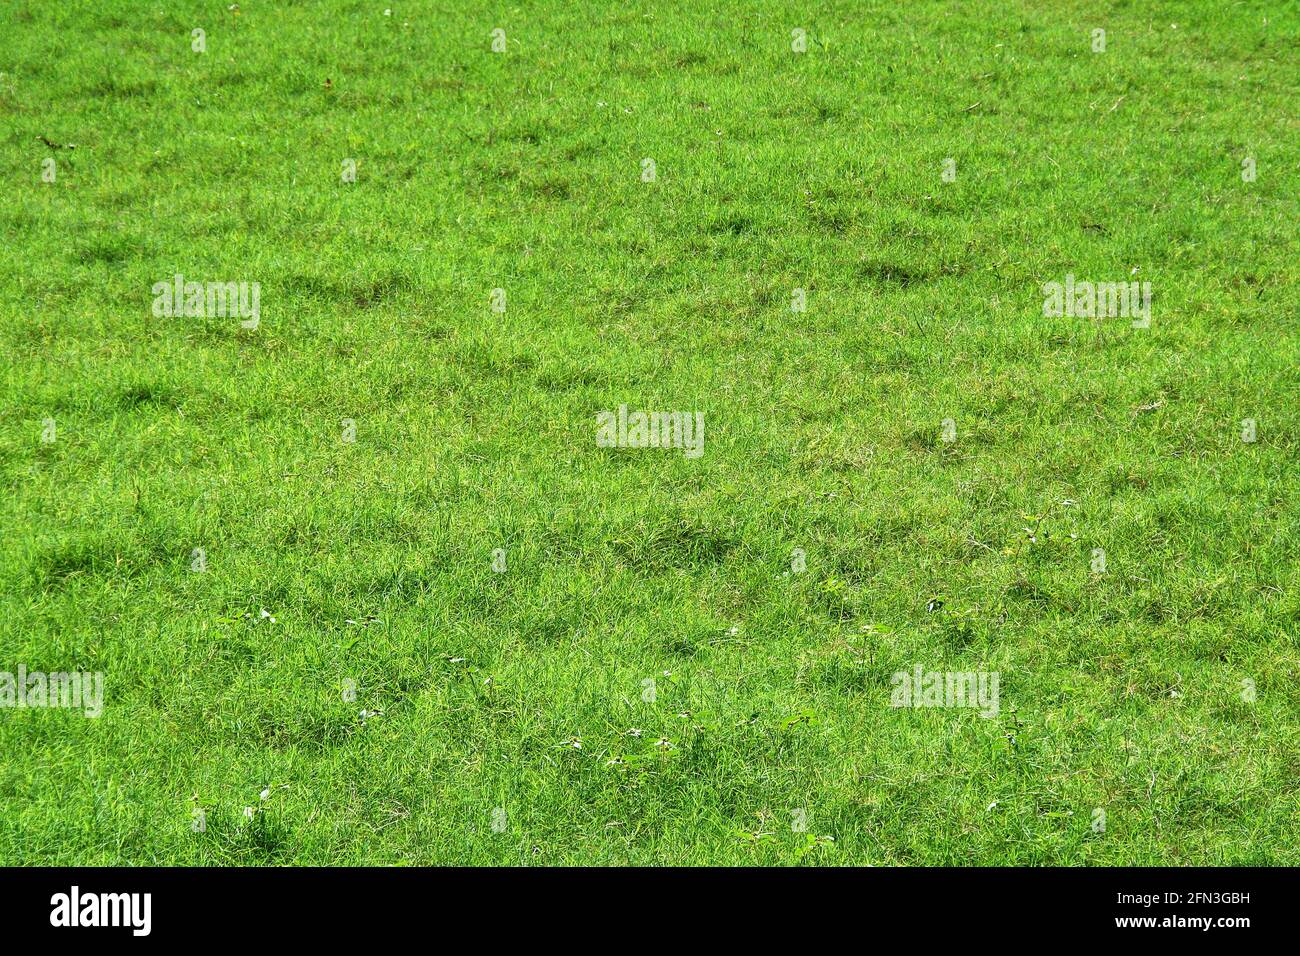 Soothing sight of a bed of velvety green grass Stock Photo